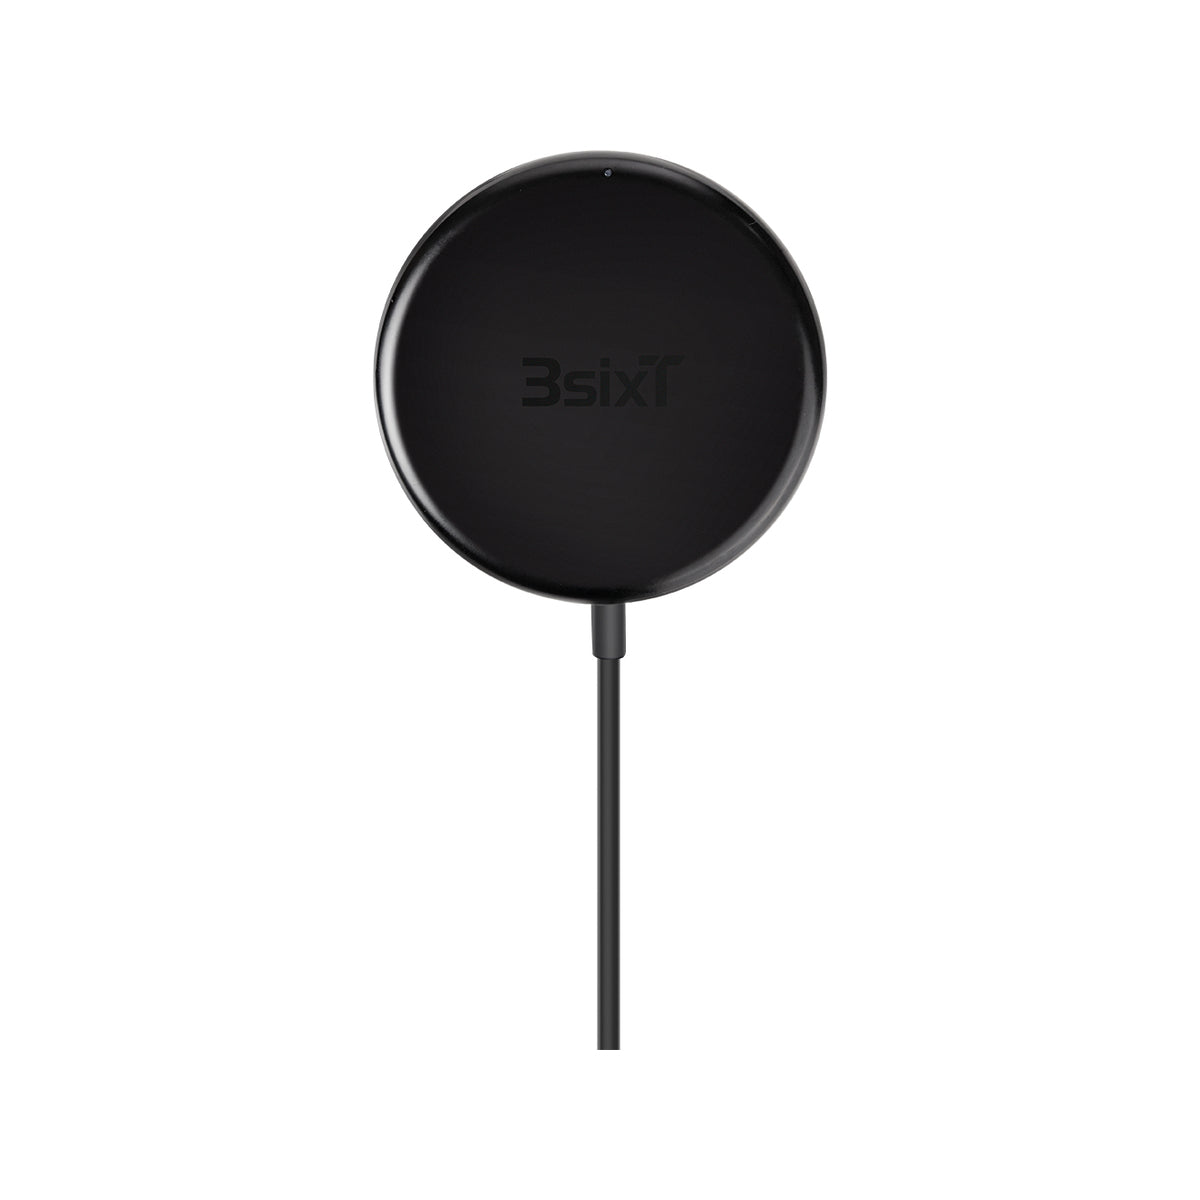 3sixT Magnetic Wireless Charger 15W.